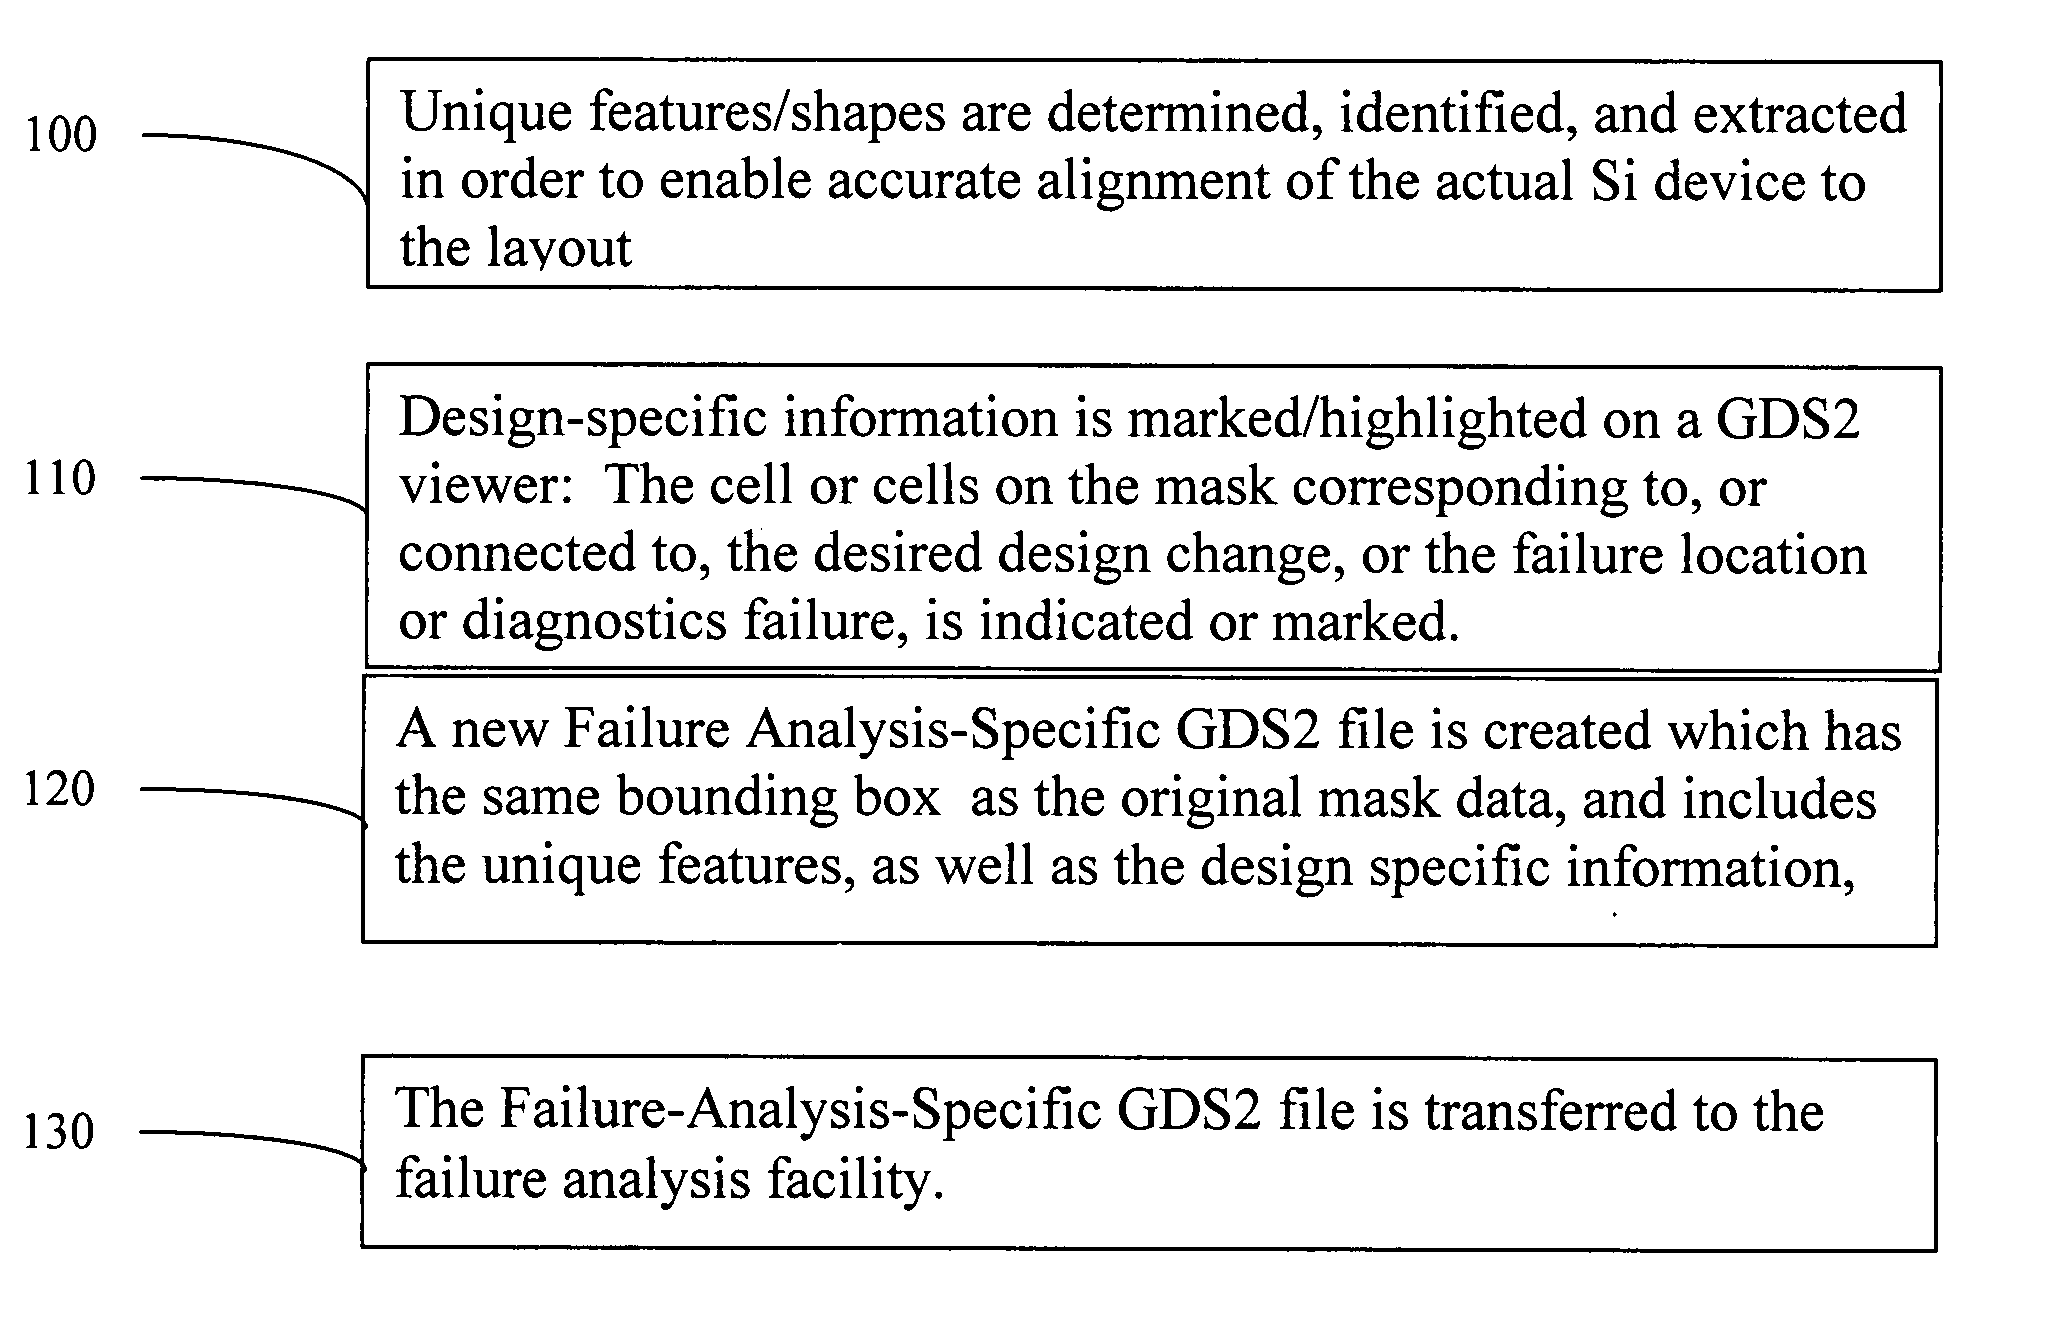 Method to transfer failure analysis-specific data between data between design houses and fab's/FA labs